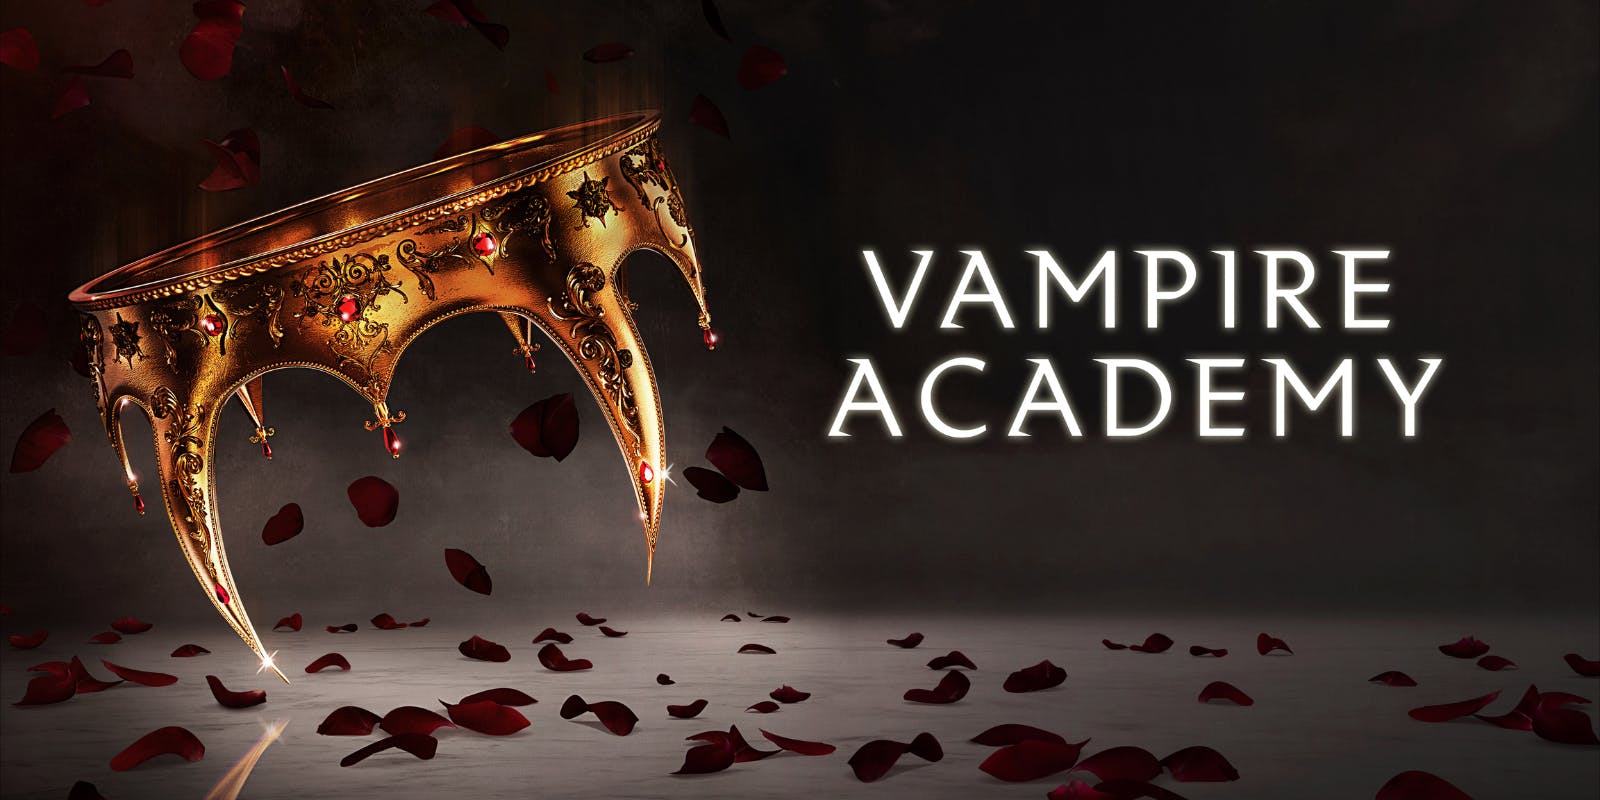 What to know before watching Vampire Academy